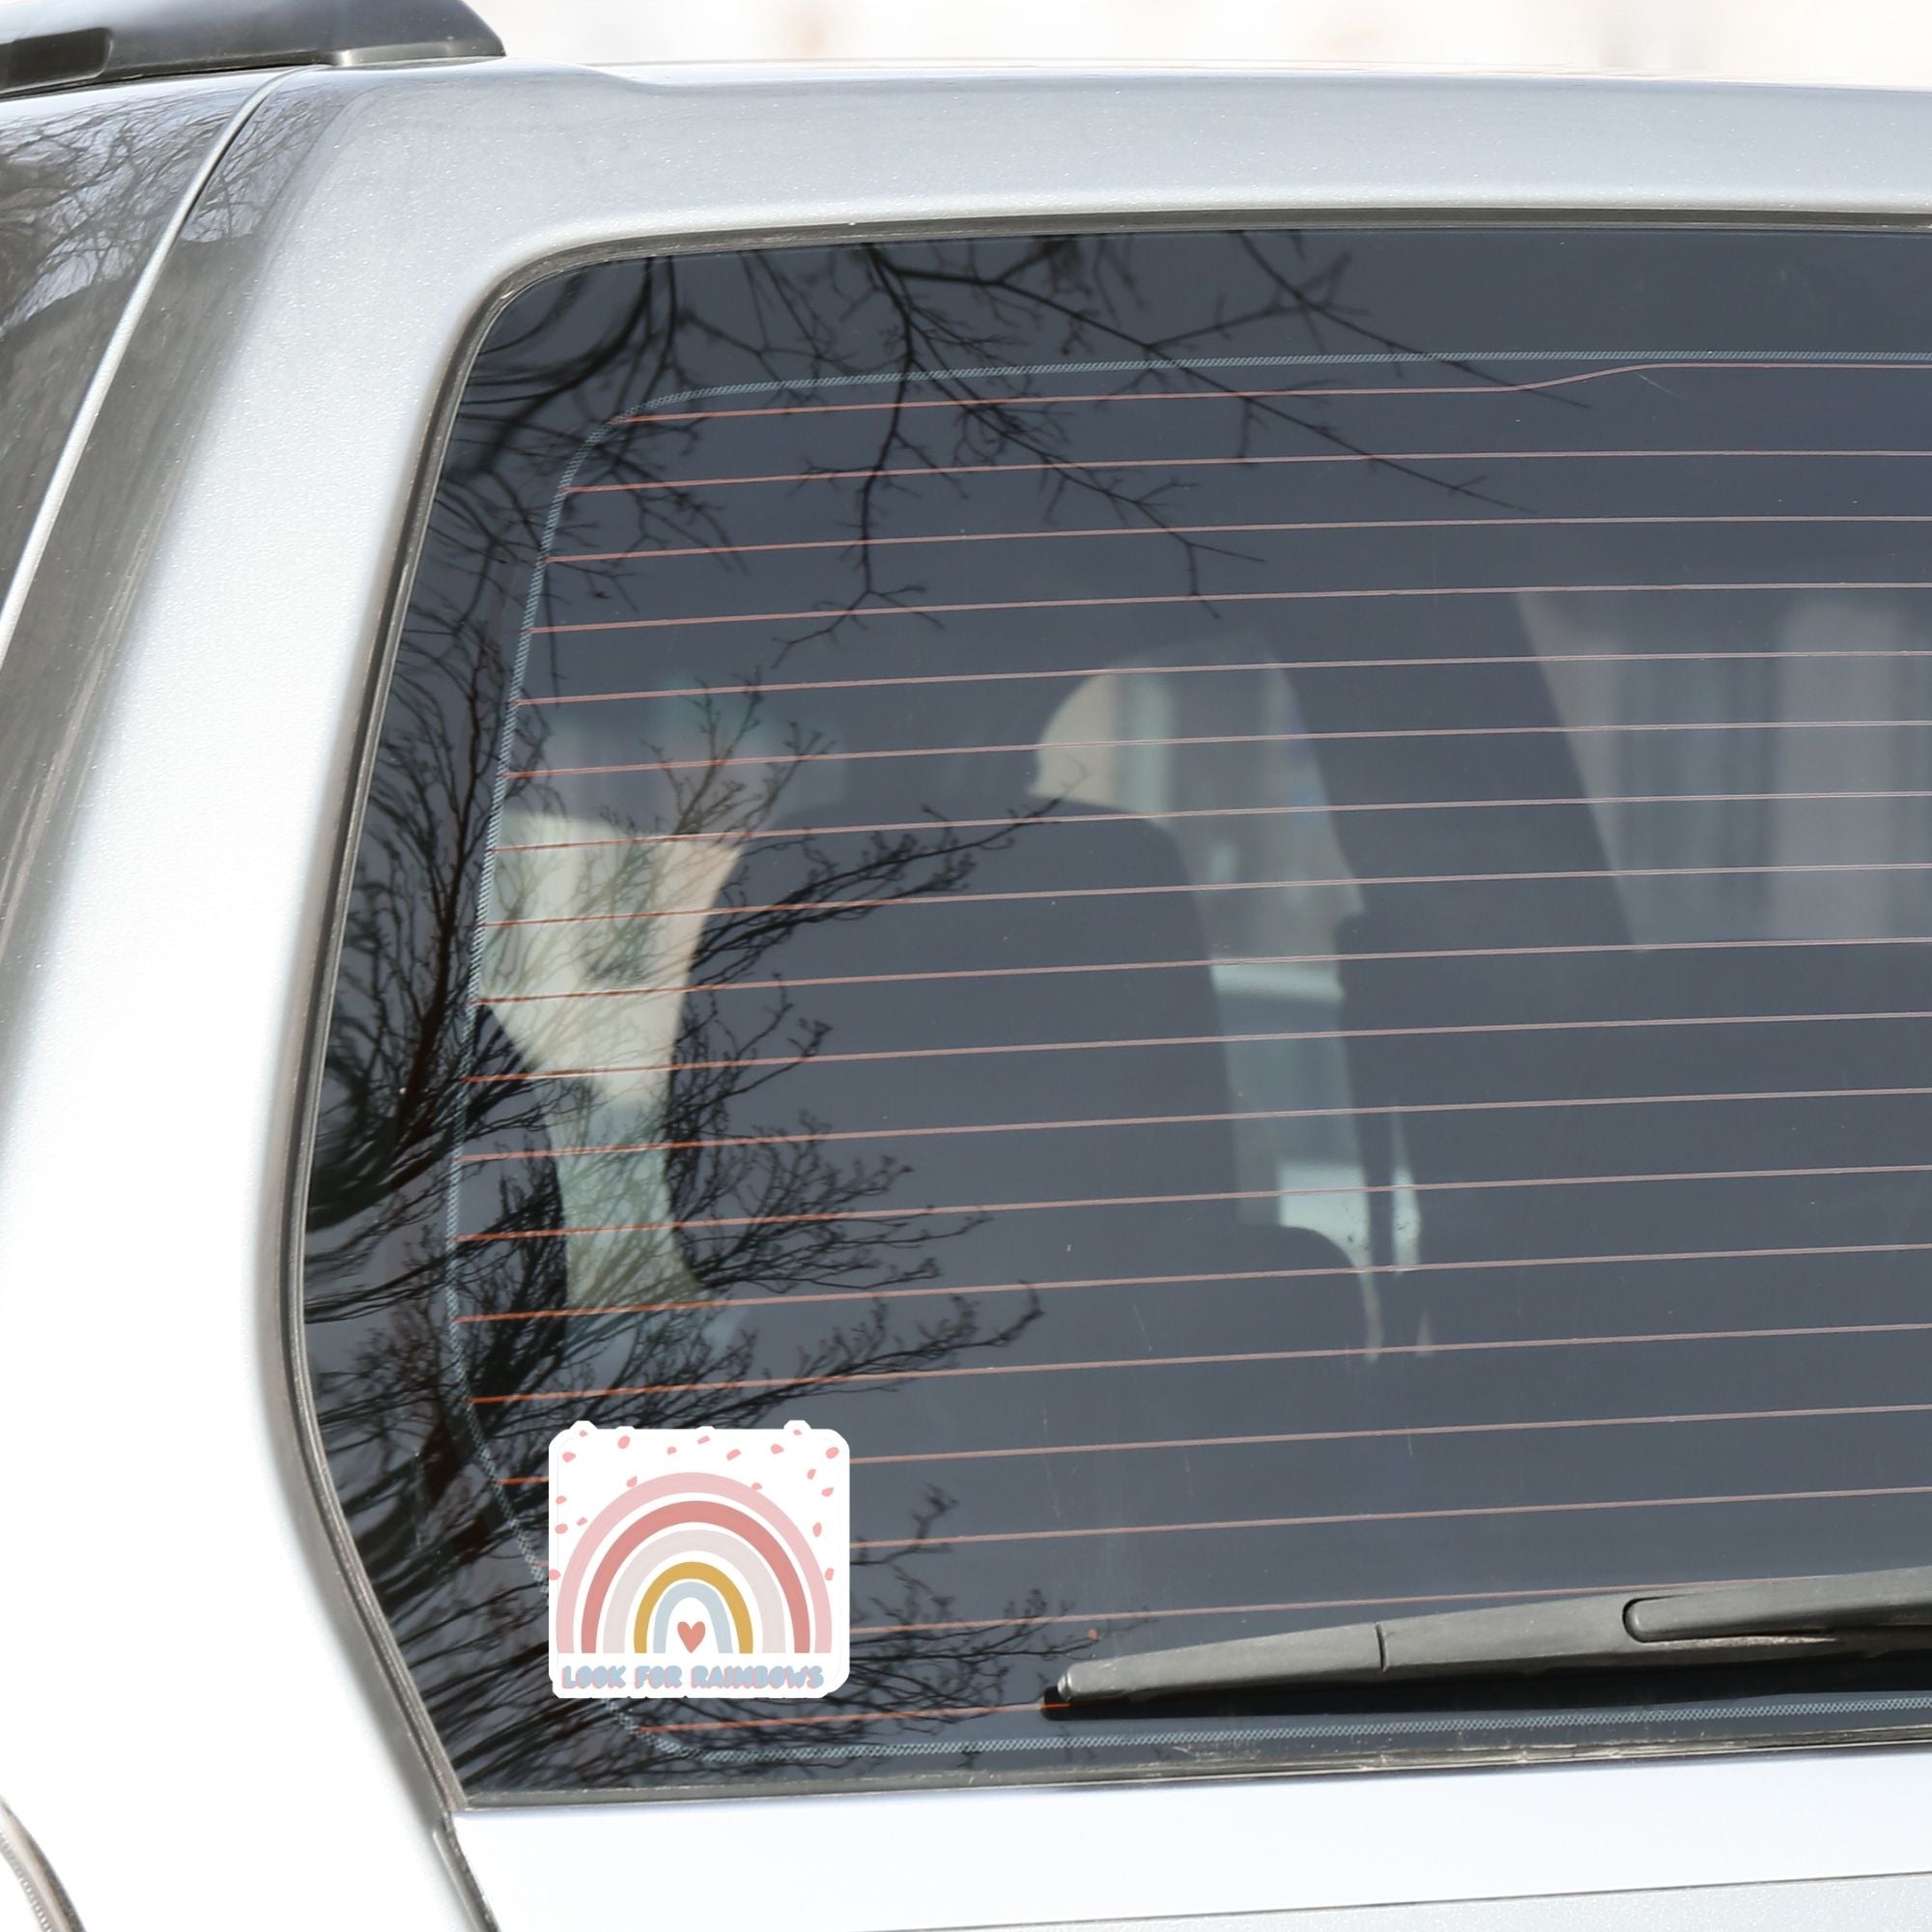 Look for Rainbows! This individual die-cut sticker features a pastel rainbow with "Look for Rainbows" written below. This image shows the Look for Rainbows sticker on the back window of a car.